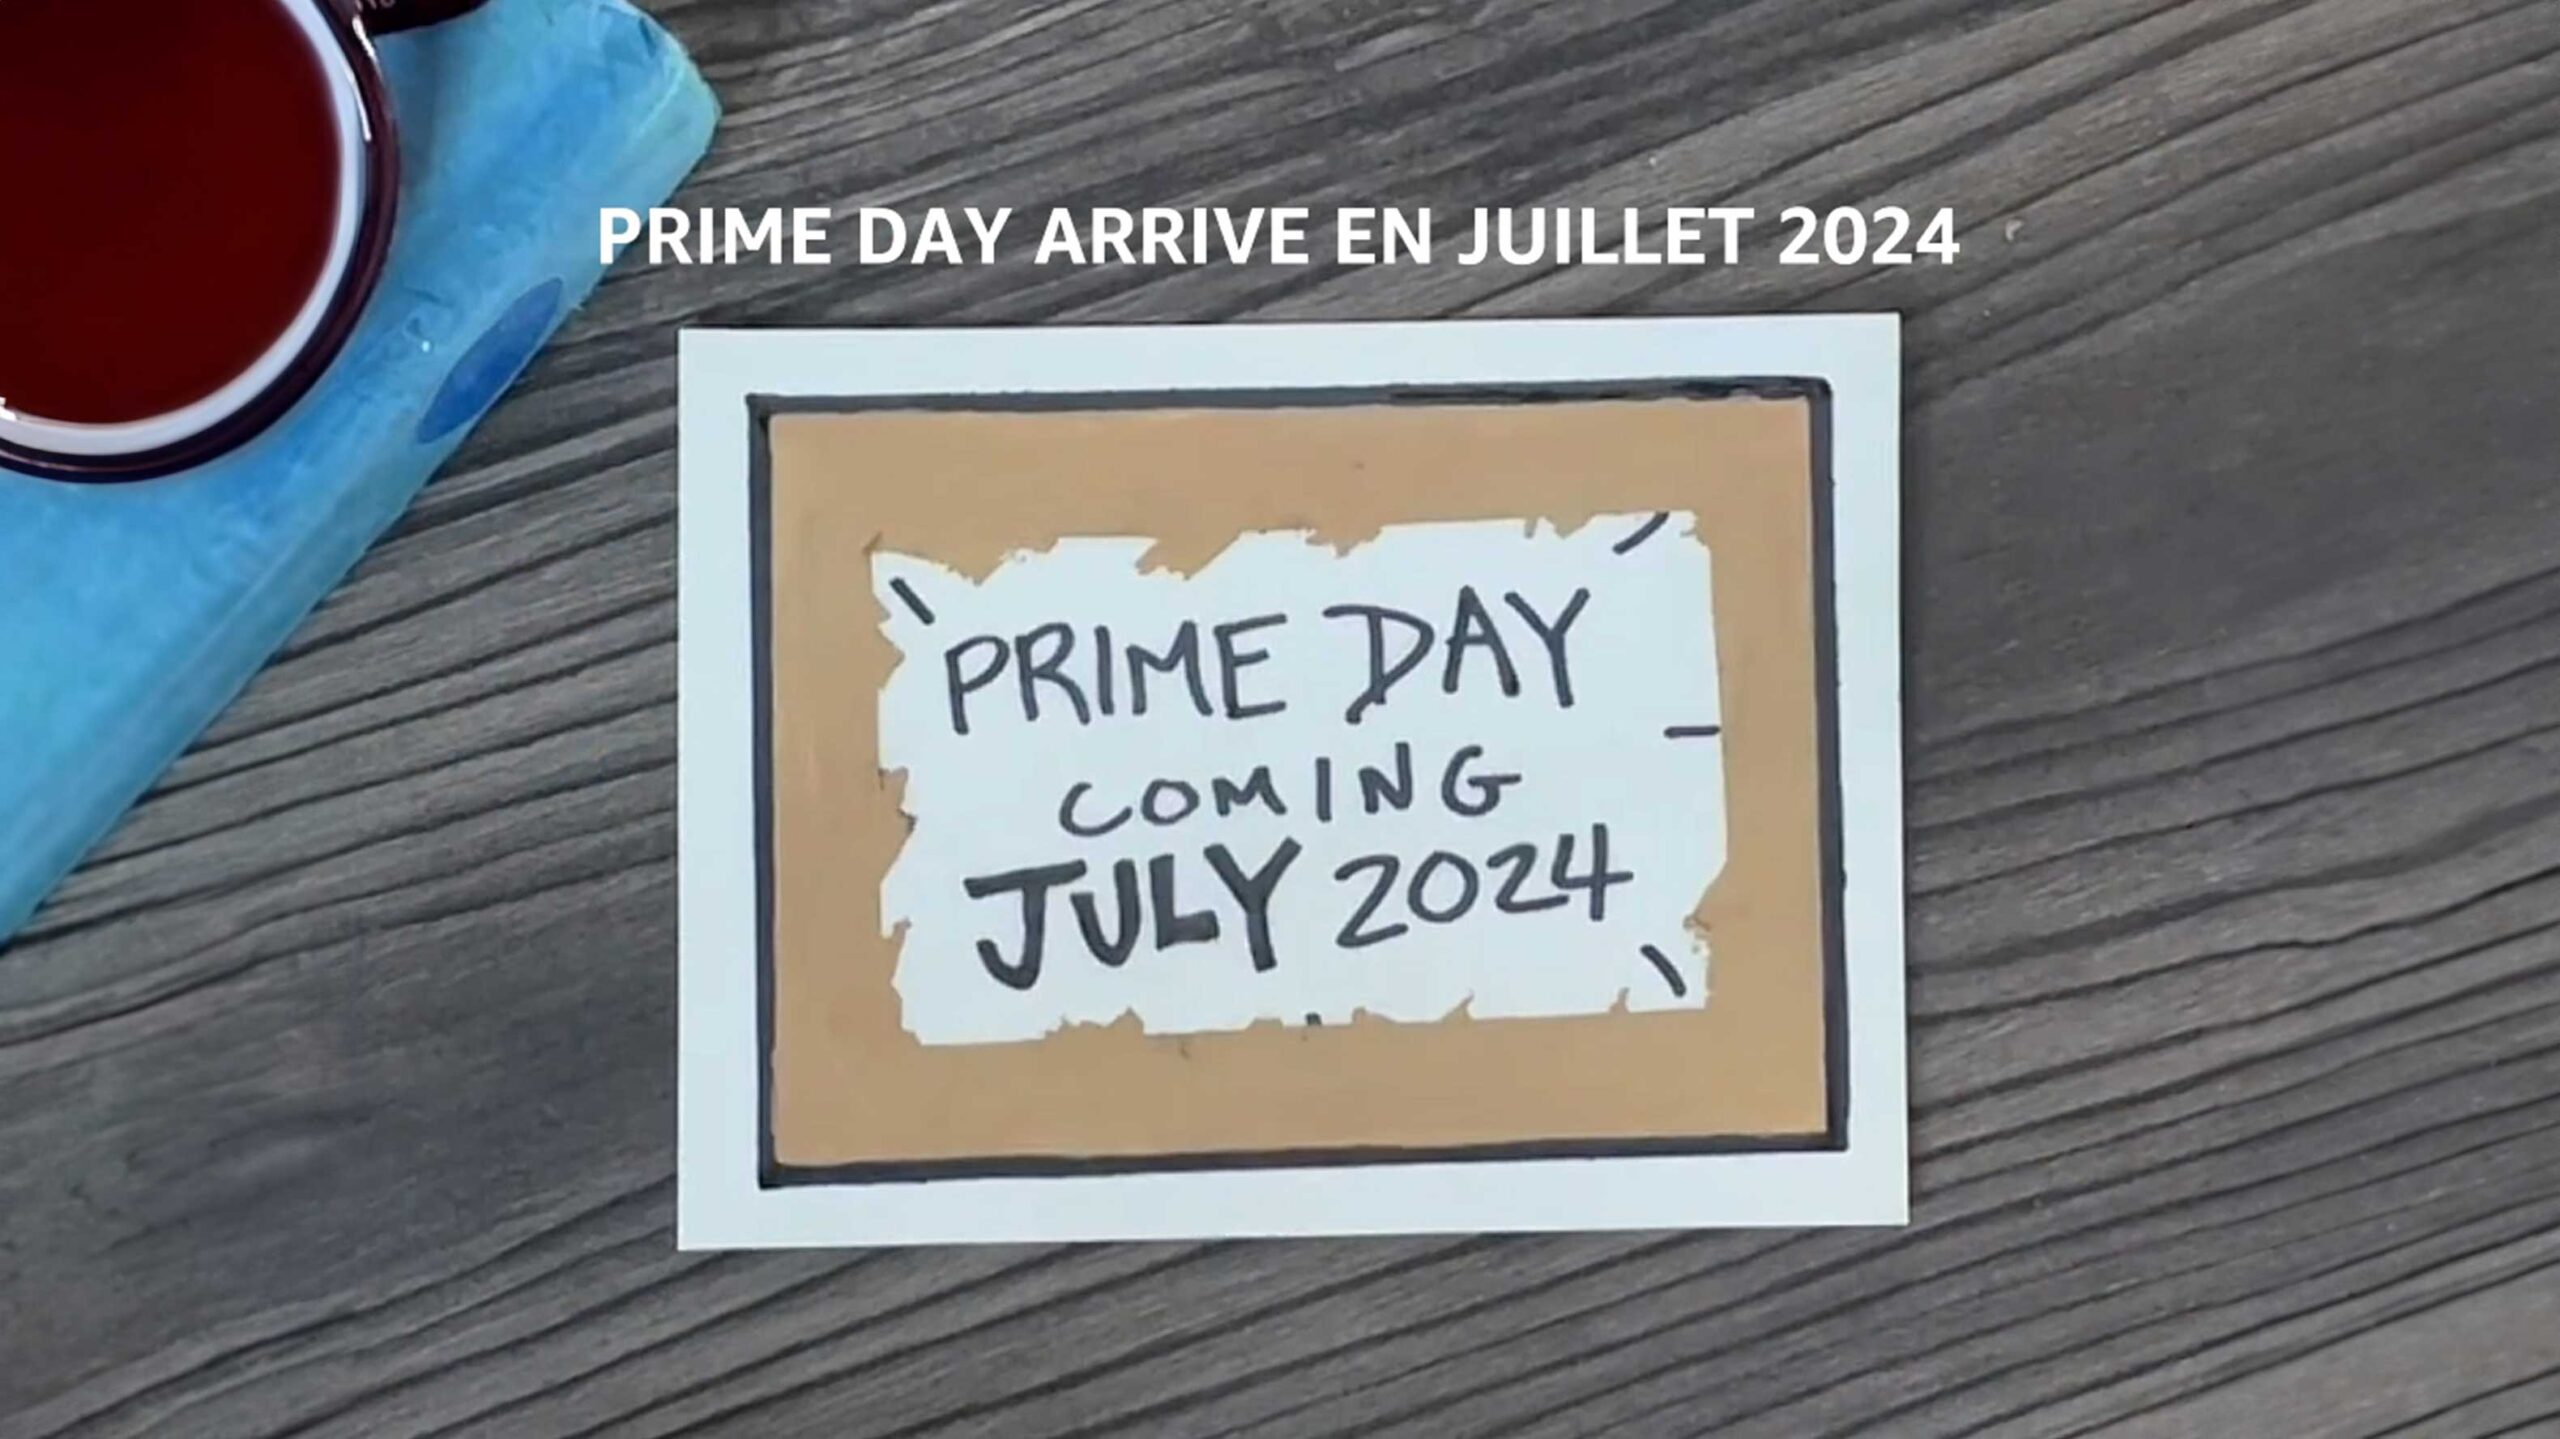 Amazon Prime day in July again this year